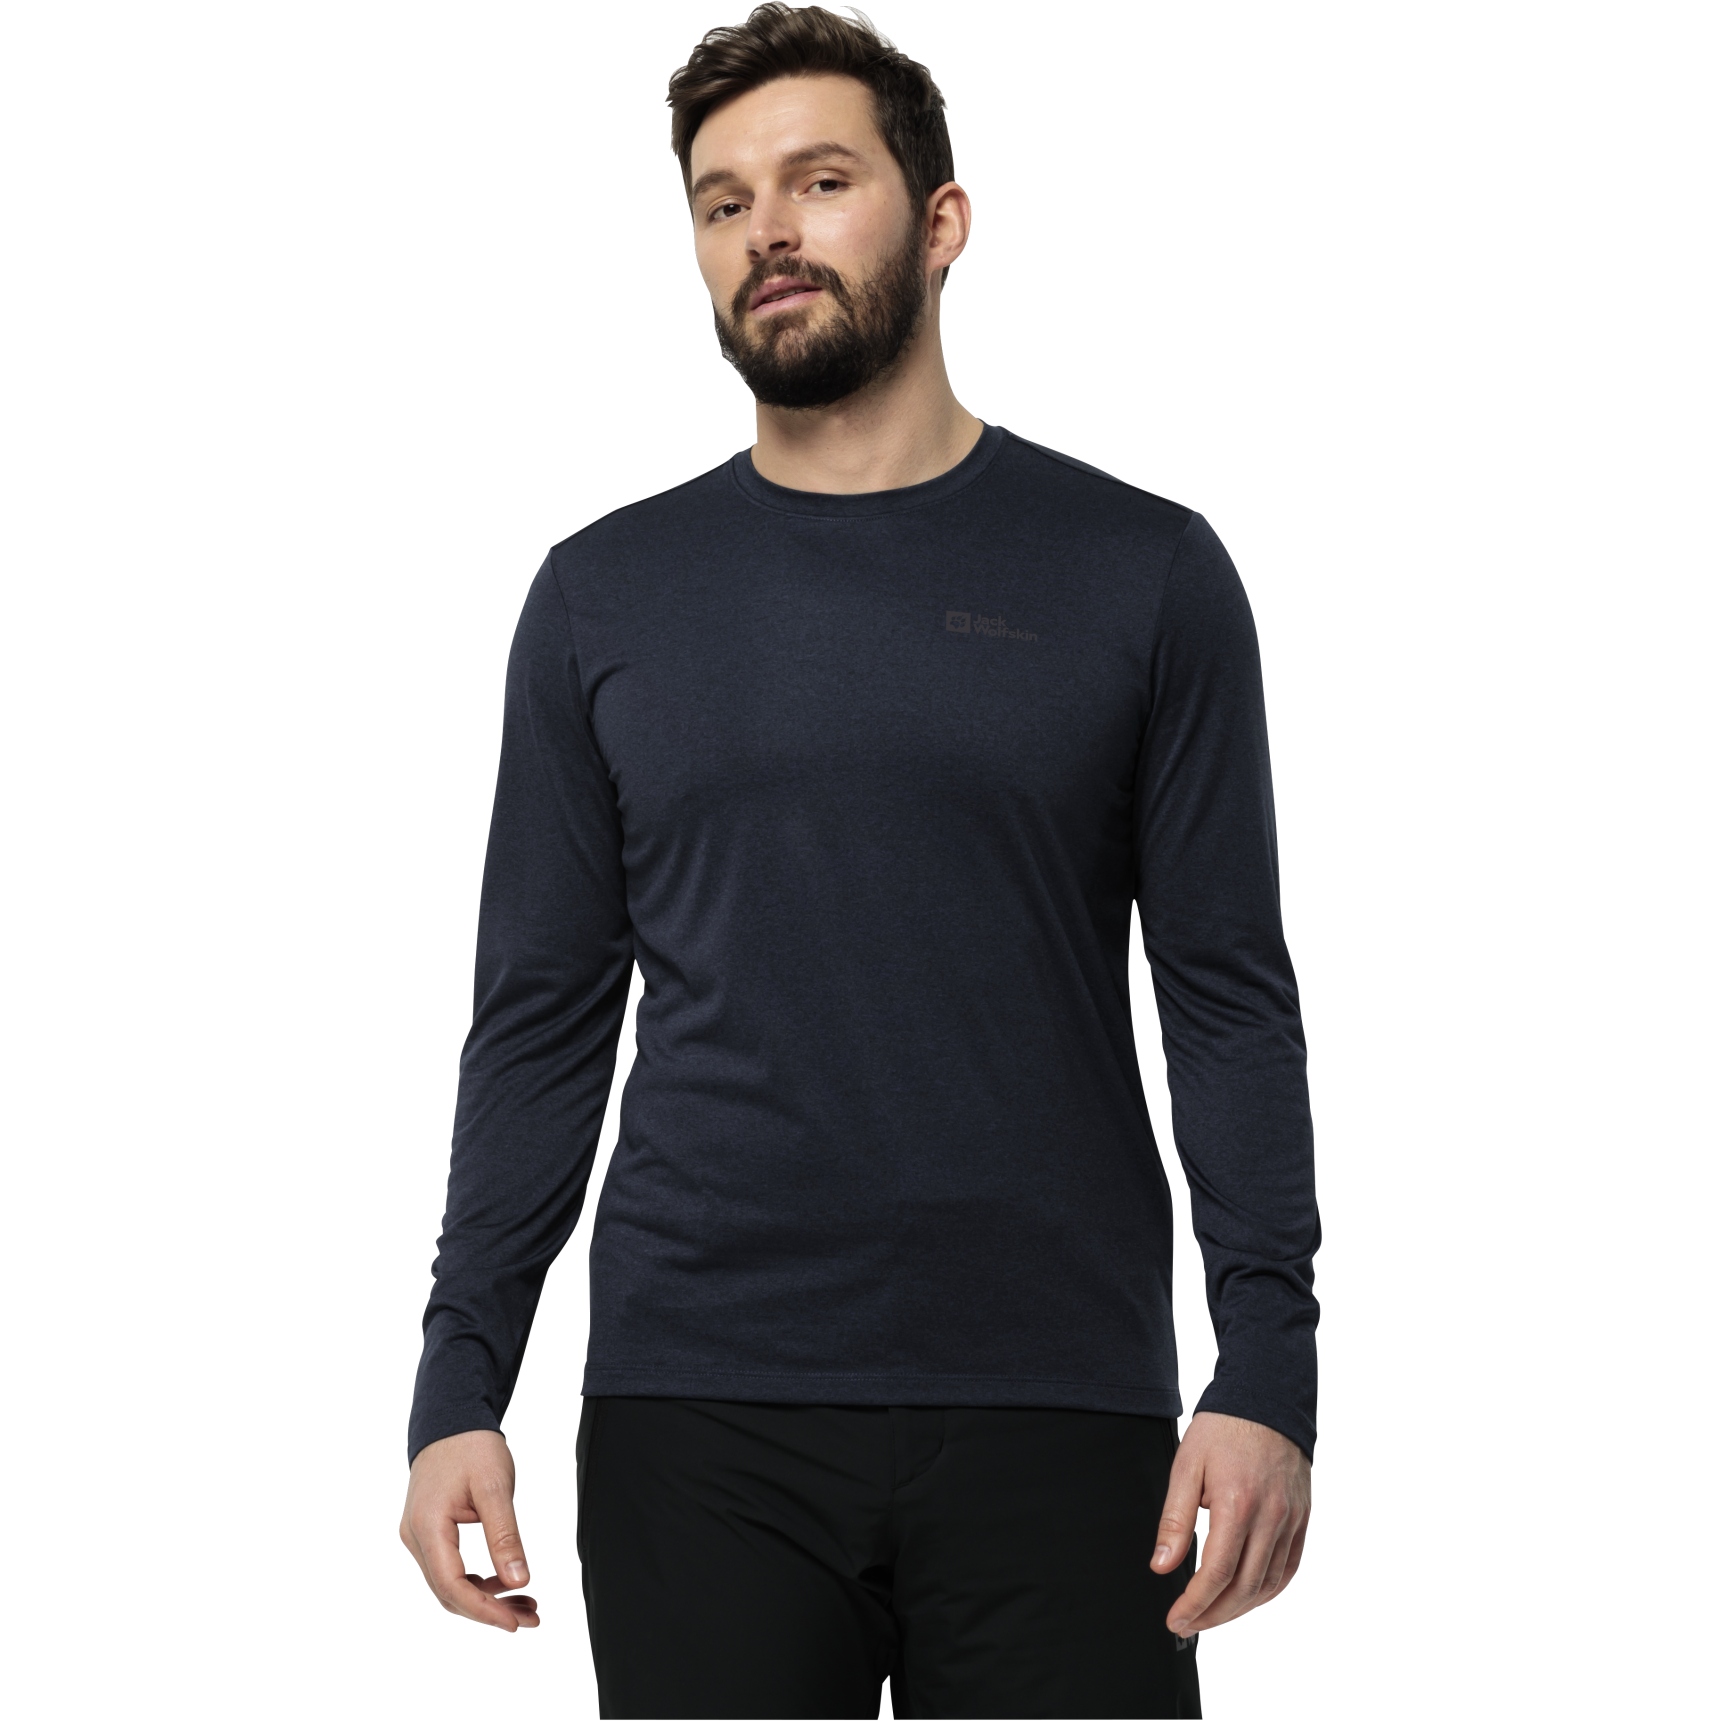 Picture of Jack Wolfskin Sky Thermal Longsleeve Shirt - night blue